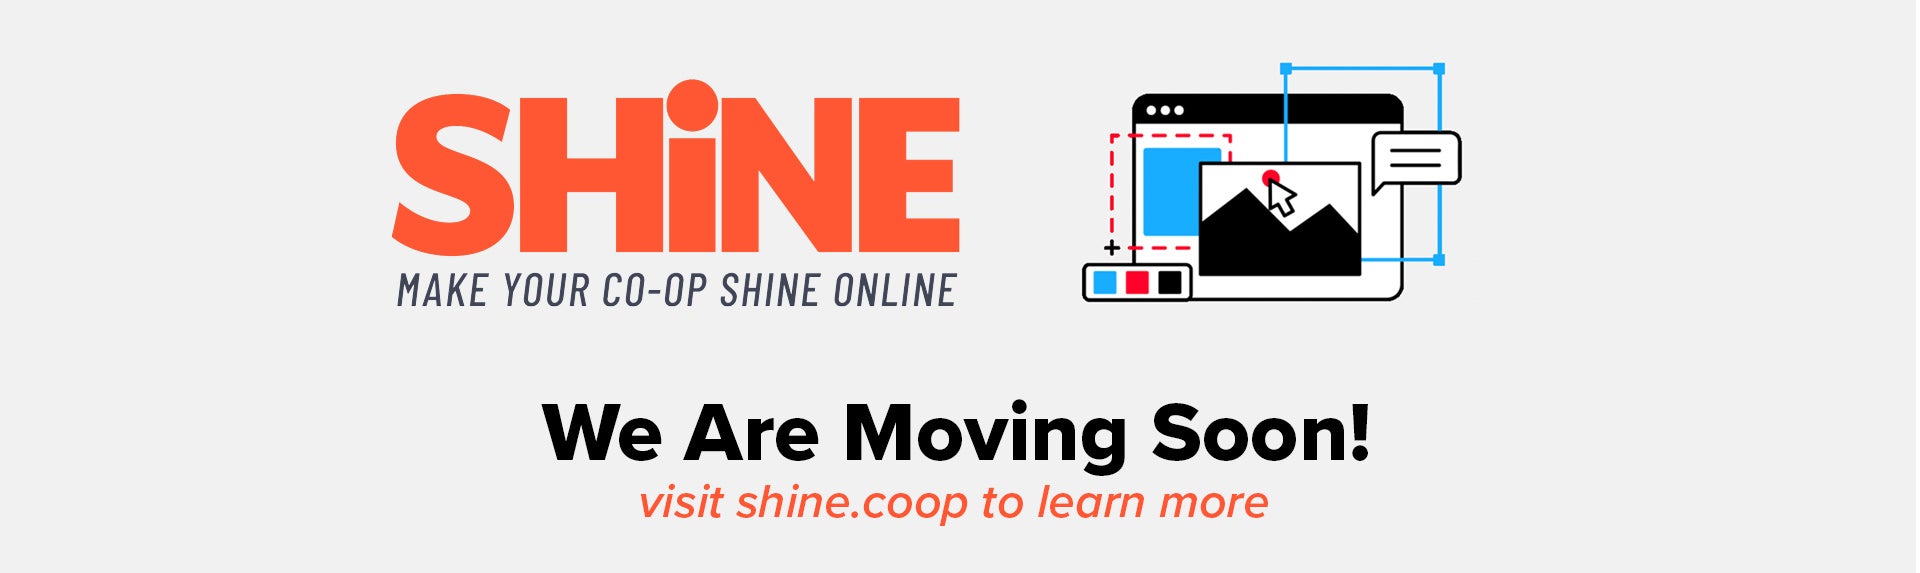 We are moving soon! Visit shine.coop to learn more.